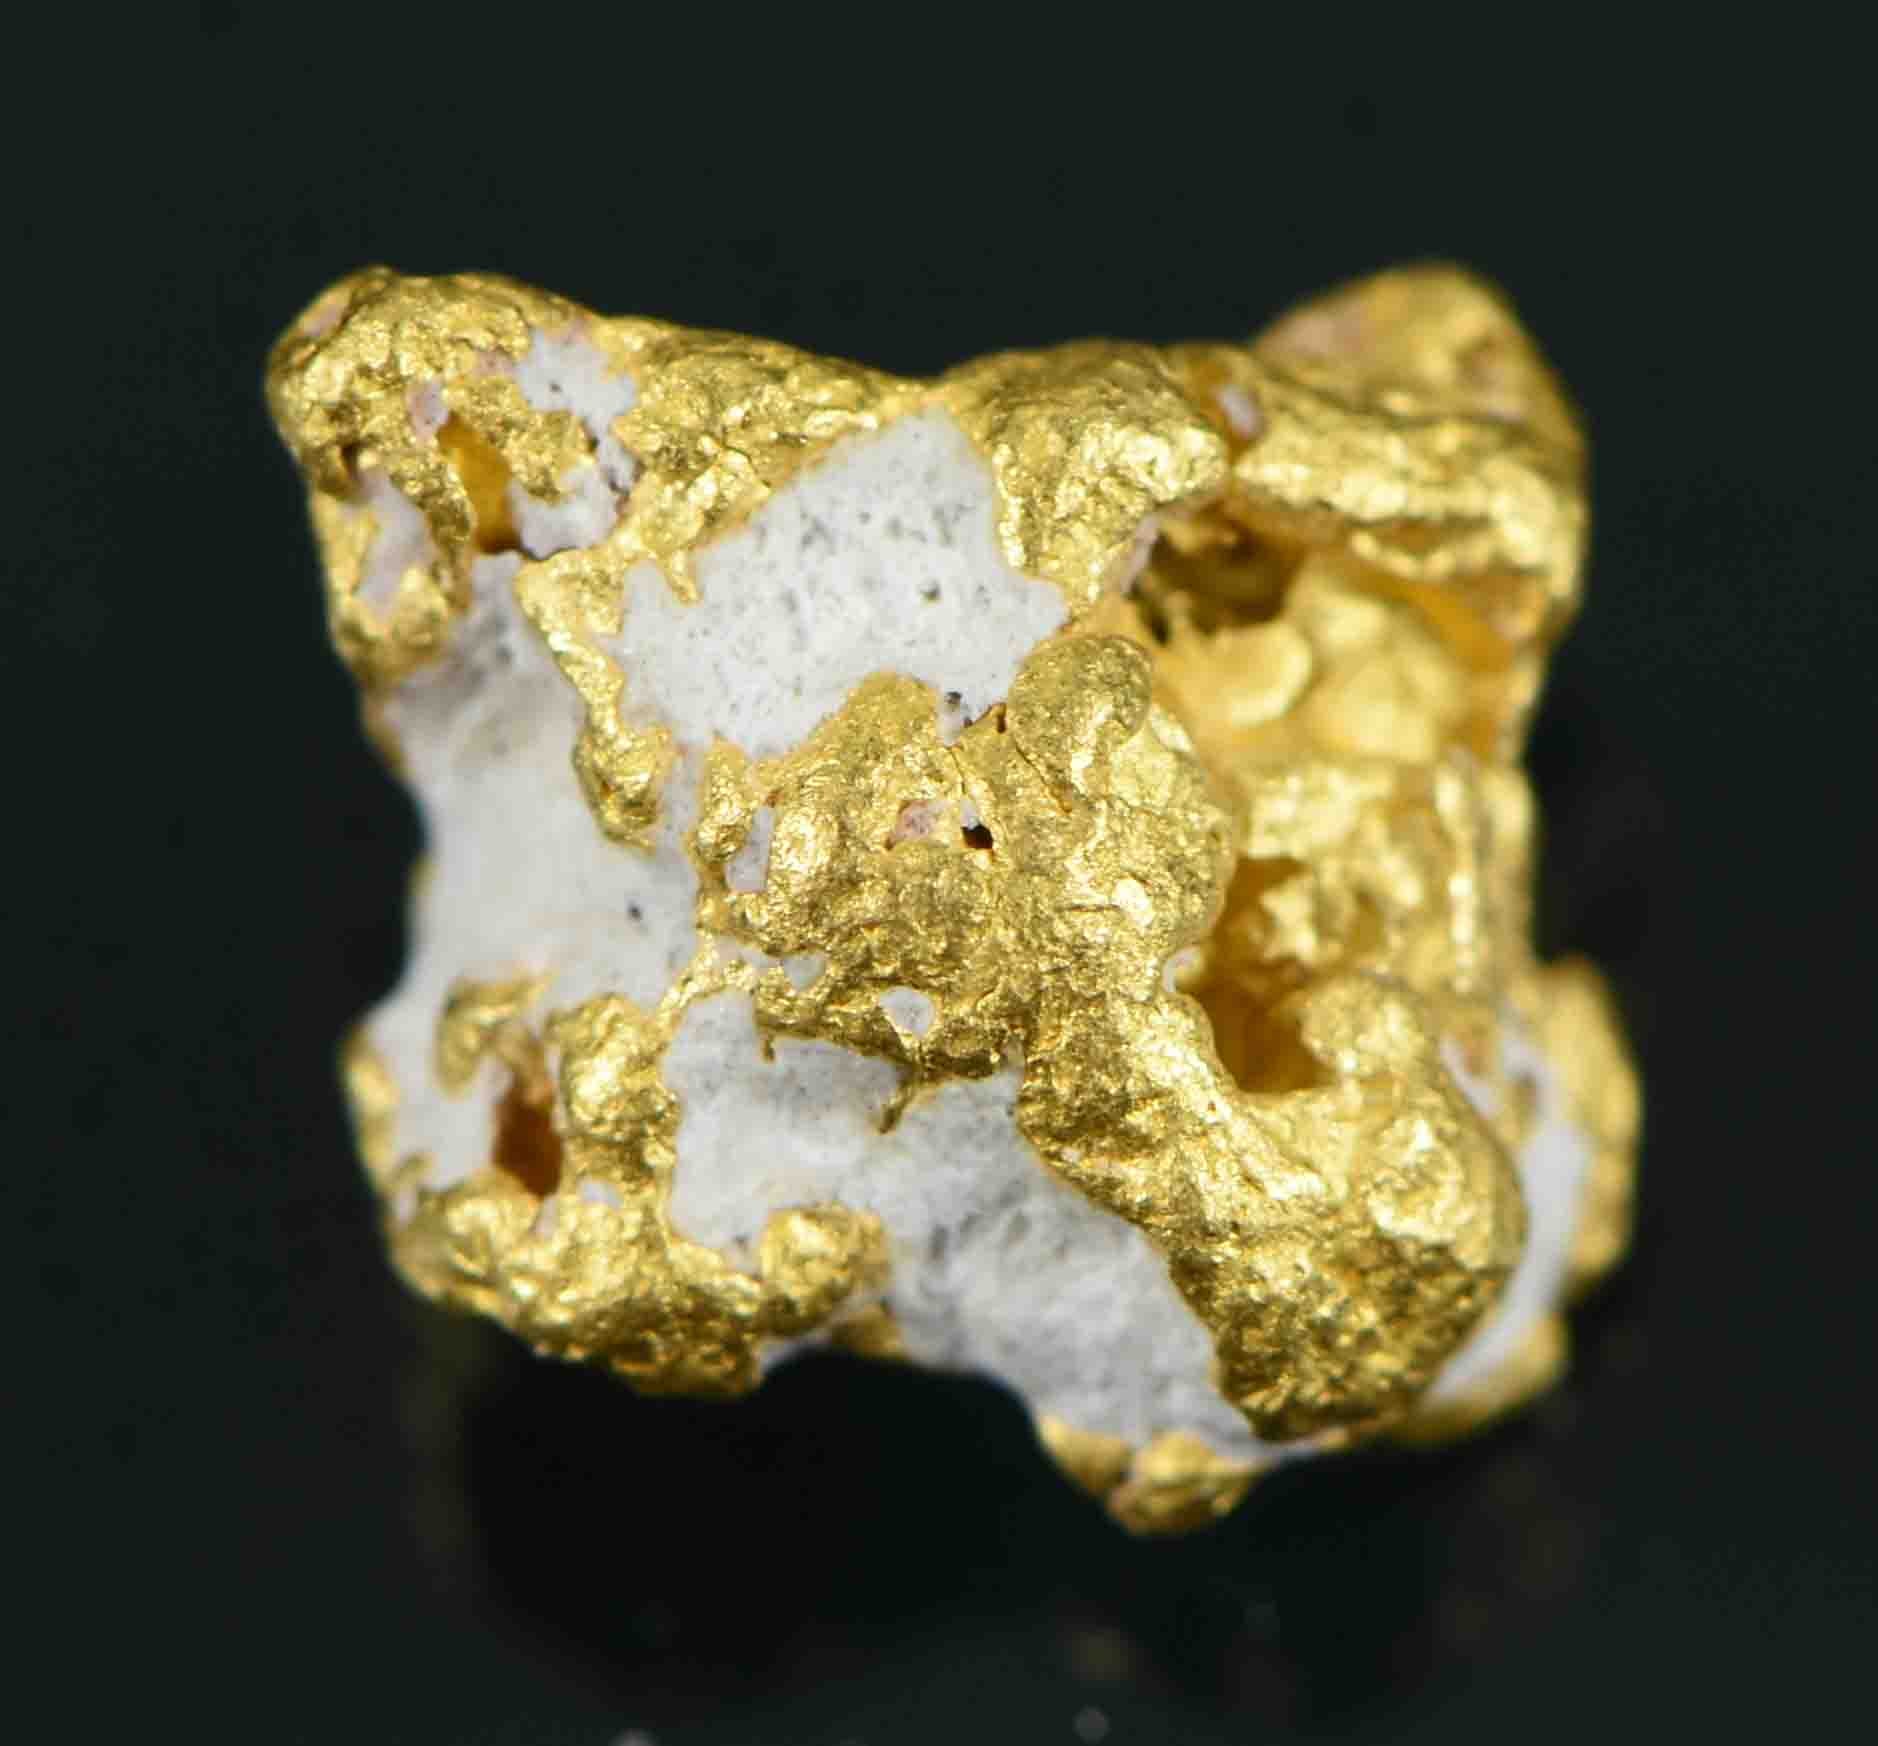 #13 Australian Natural Gold Nugget With Quartz Weighs 1.51 Grams.